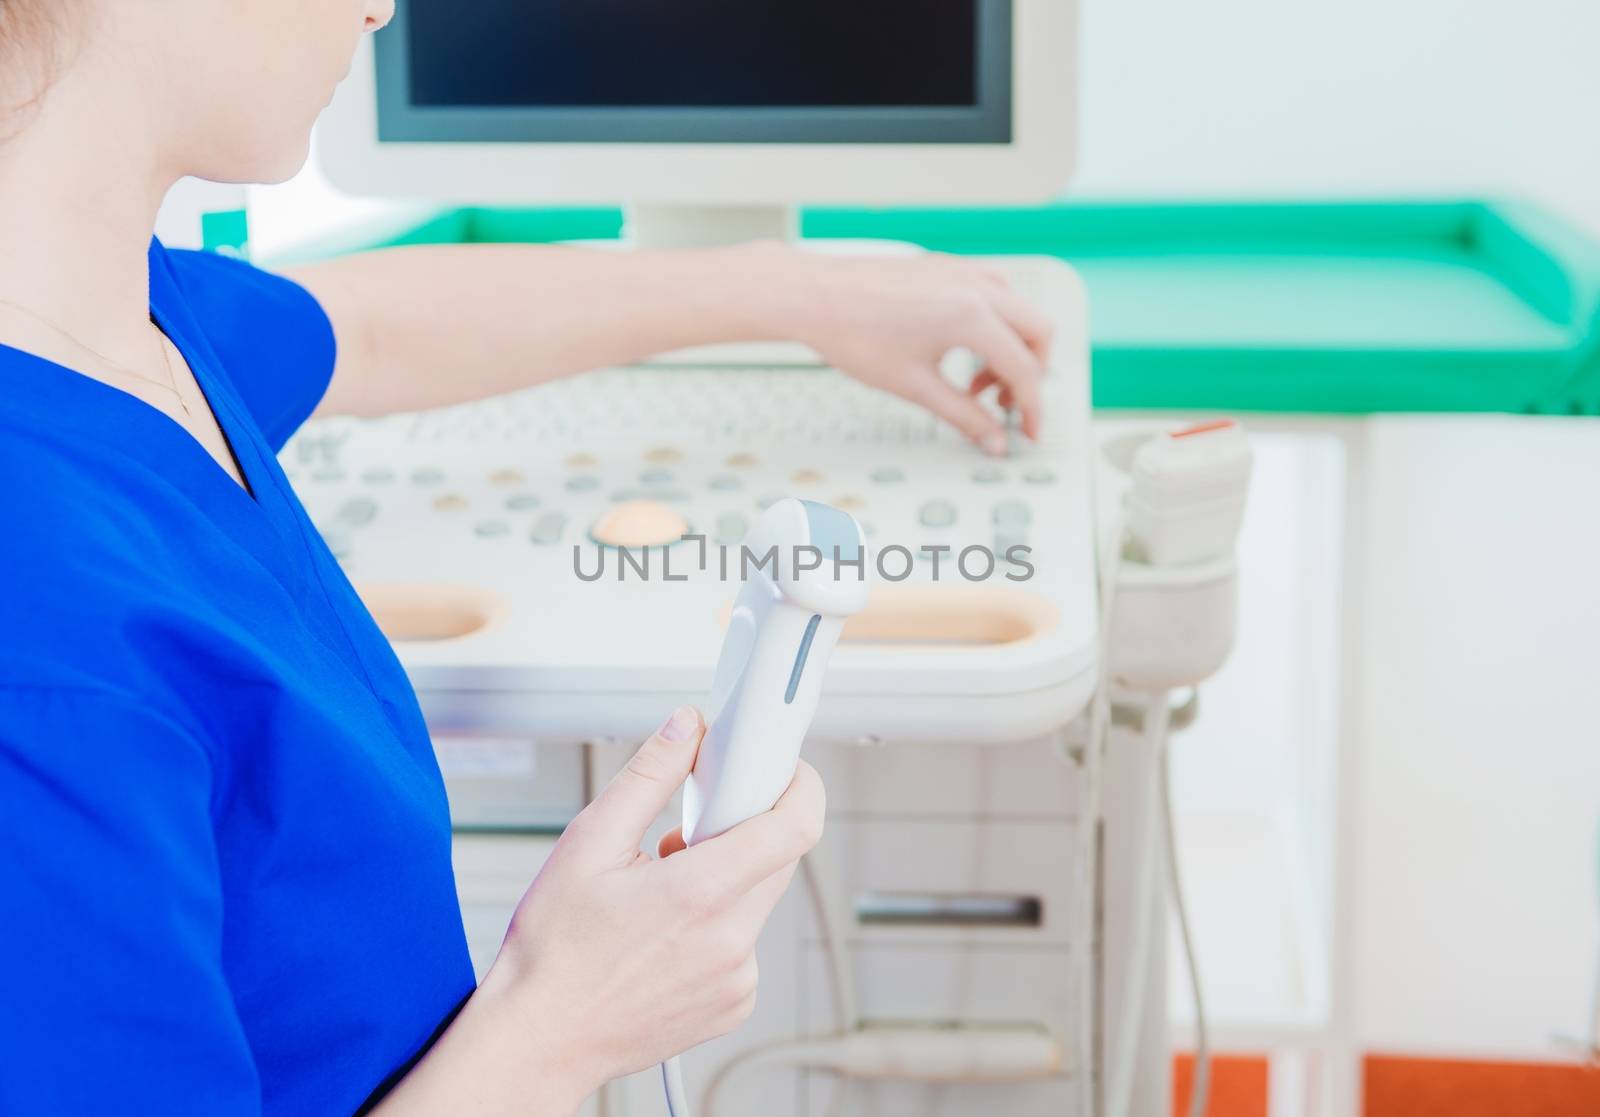 Ultrasonography Testing Equipment in Hand of Female Technician. Medical Theme.